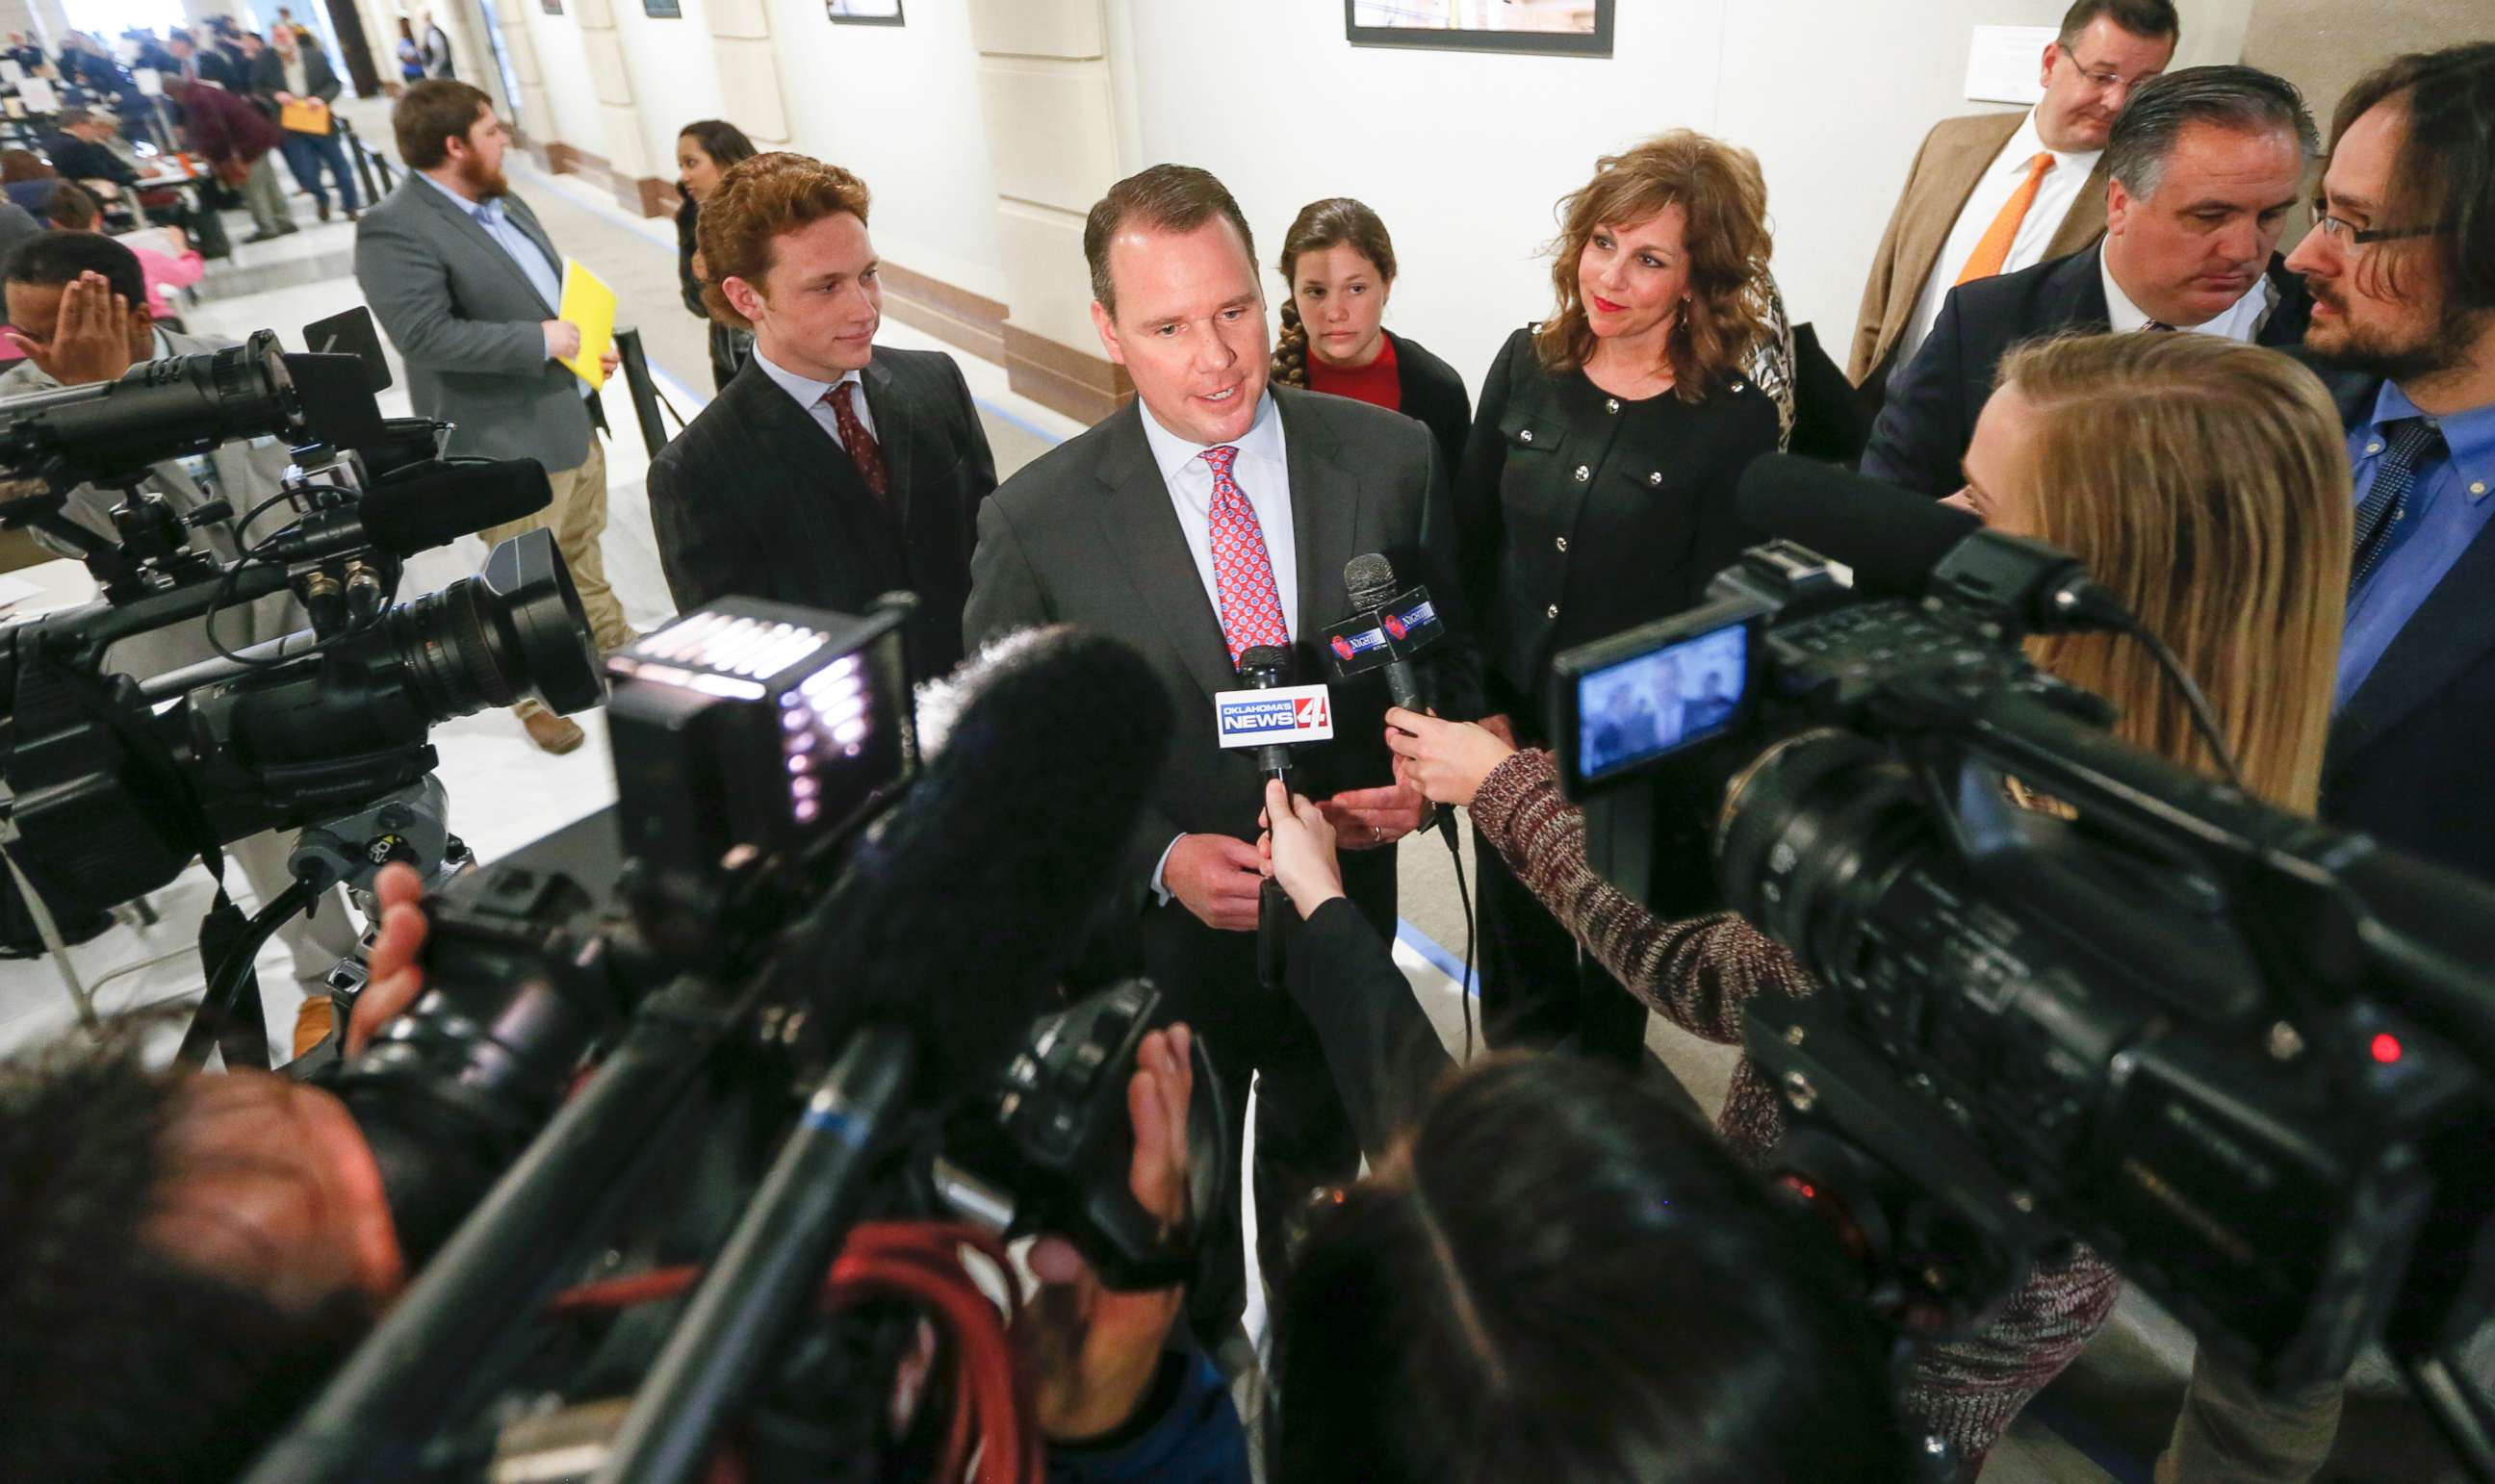 PHOTO: Oklahoma Lt. Gov. Todd Lamb speaks to the media after filing to run for governor as a Republican during candidate filing at the Oklahoma state Capitol, in Oklahoma City, April 11, 2018.